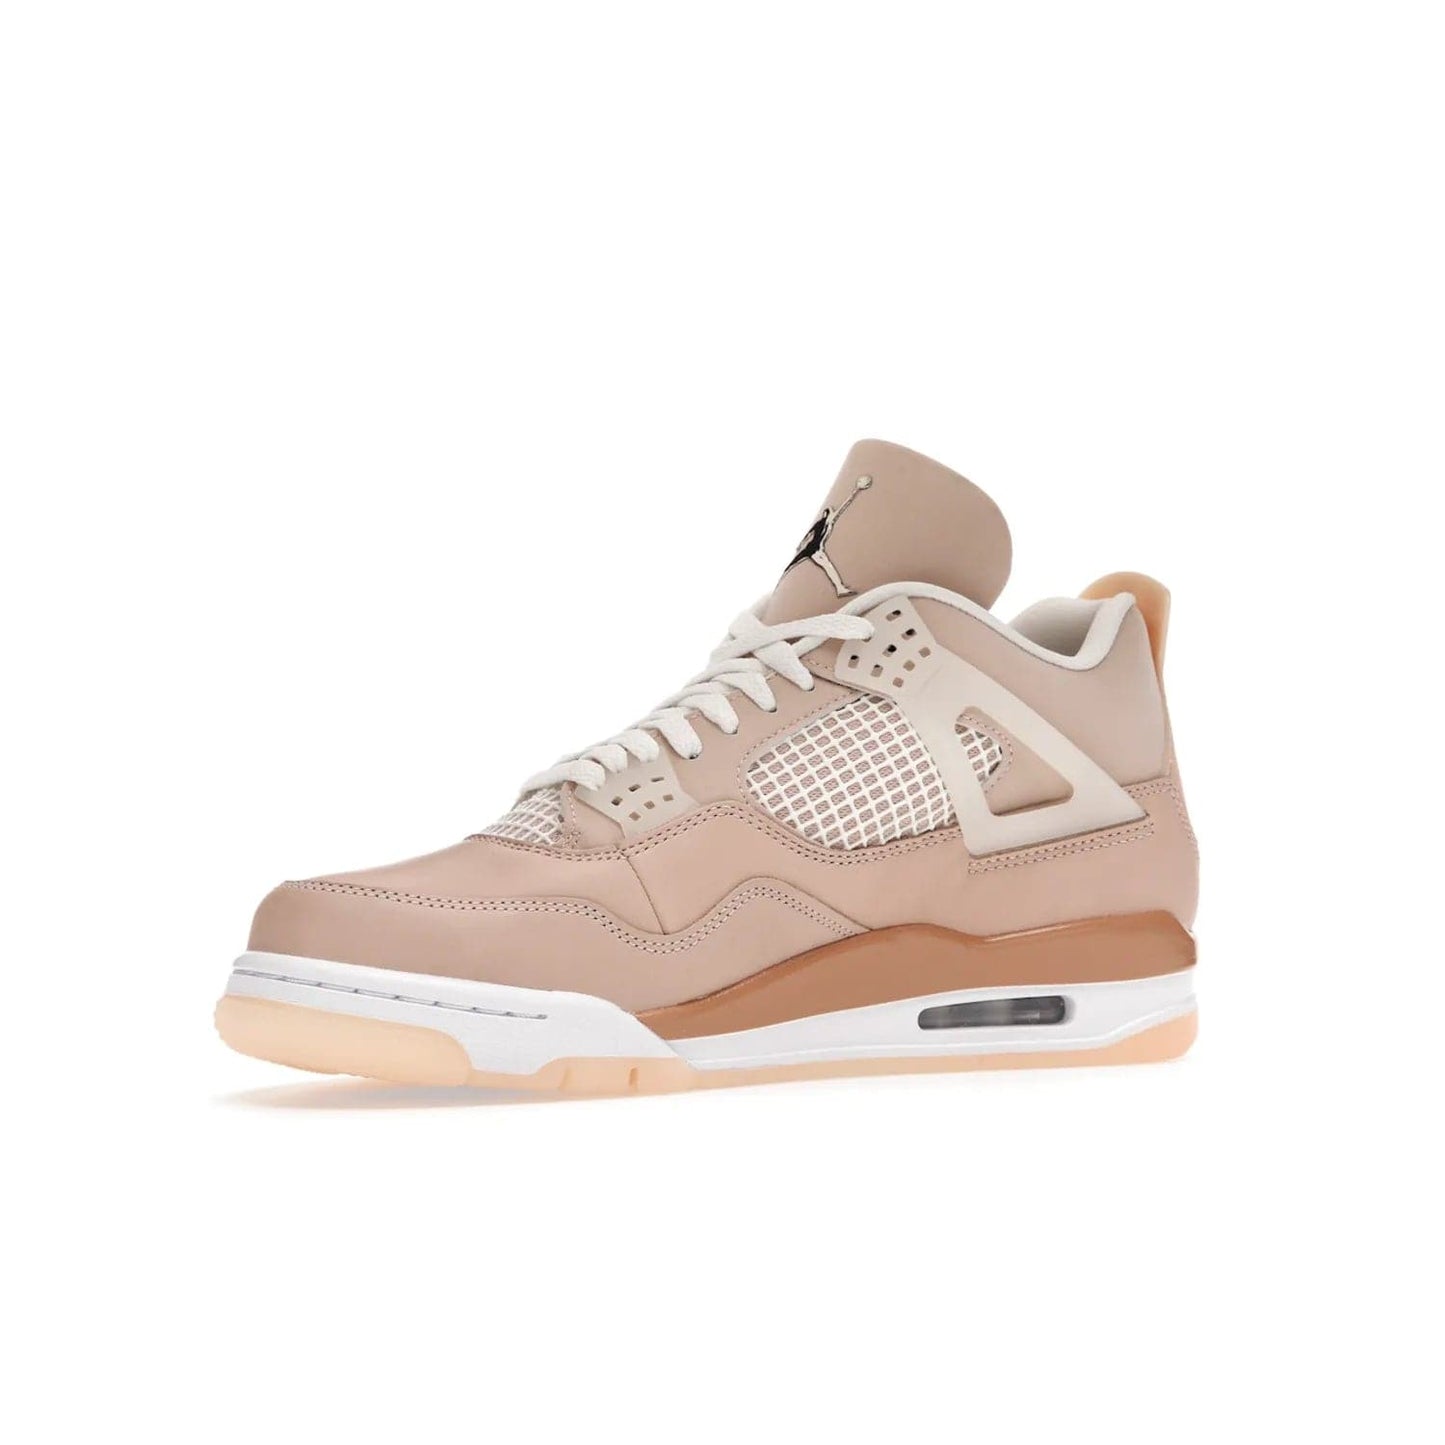 Jordan 4 Retro Shimmer (Women's) - Image 16 - Only at www.BallersClubKickz.com - Air Jordan 4 Shimmer (W): A women's-exclusive design with a buttery beige upper and Silver/Orange Bronze details. Durabuck and metallic Jumpman branding elevate the iconic silhouette. Shop now.